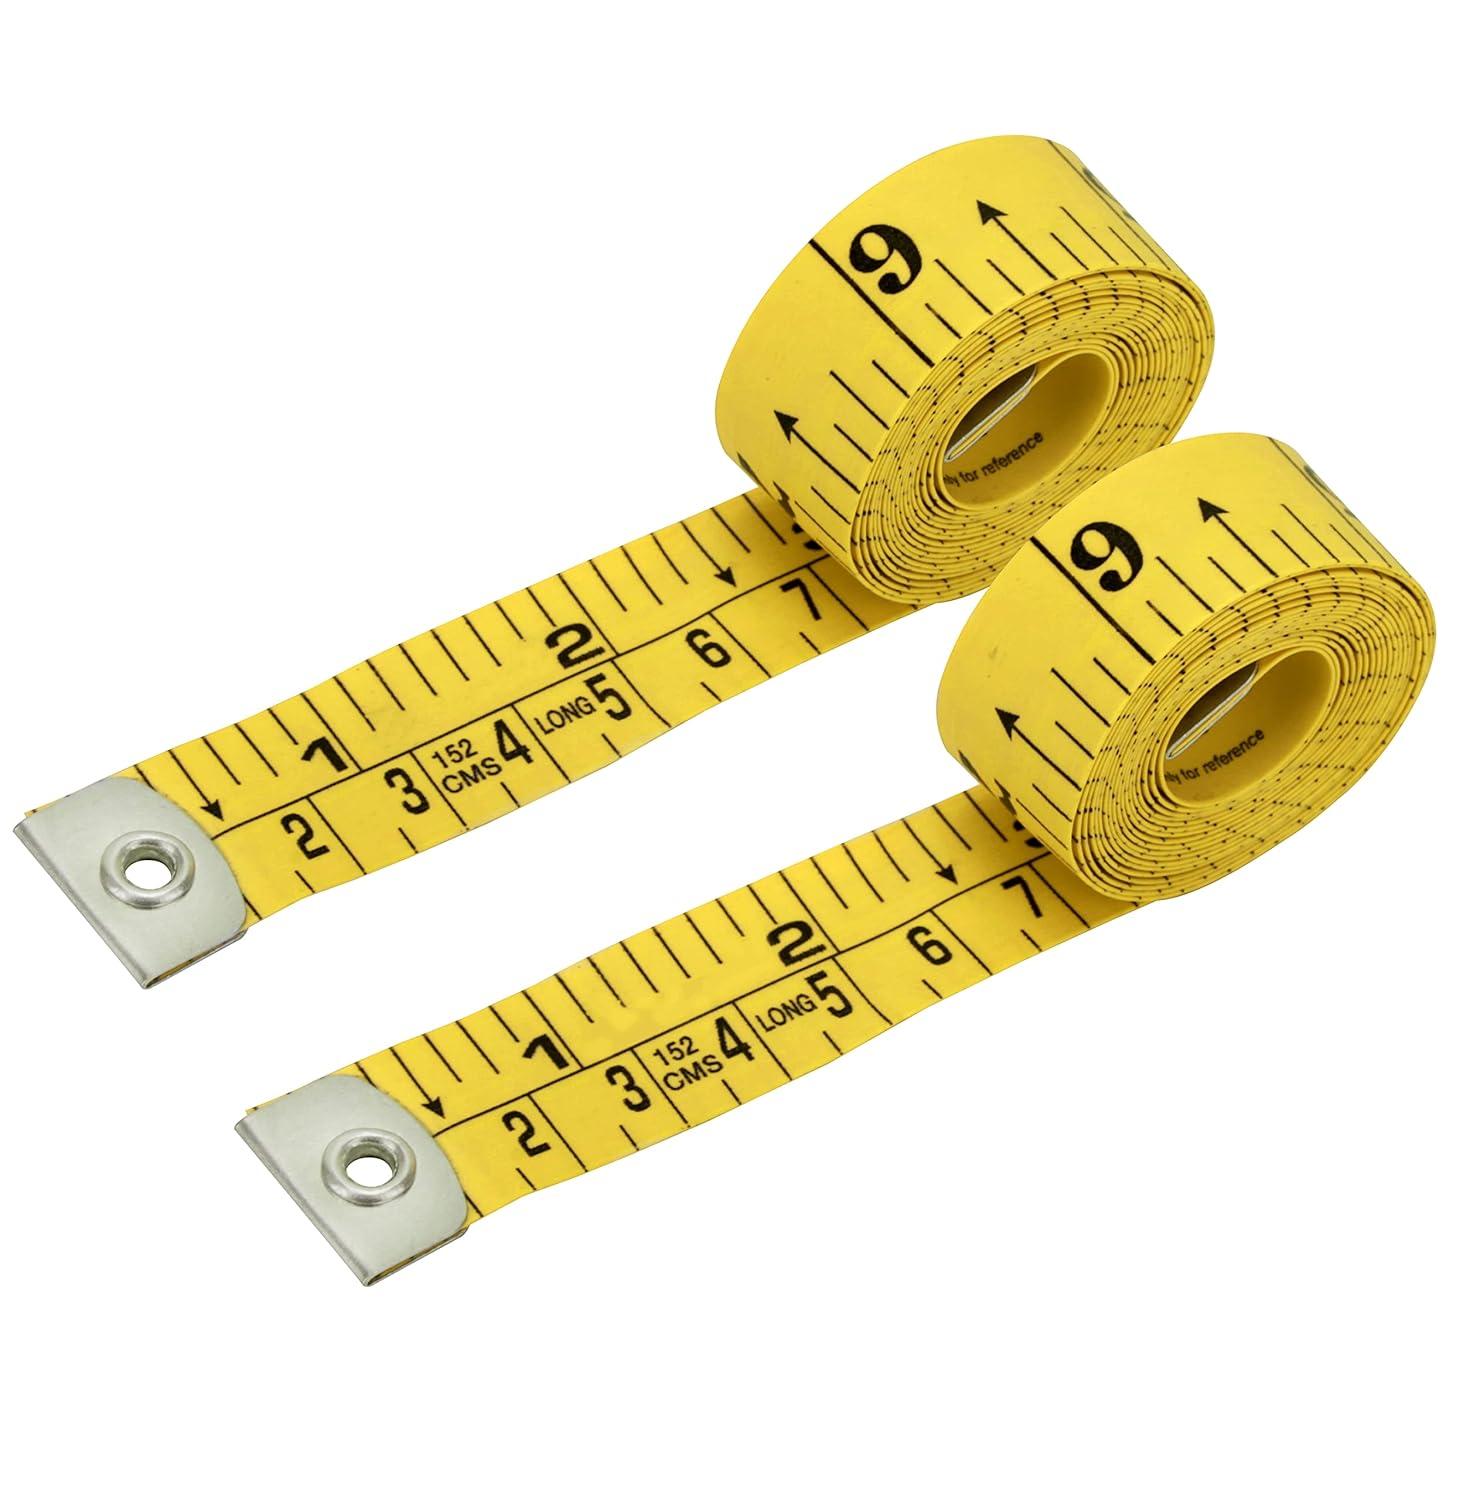 Tailor Measuring Tape with both inch and metric